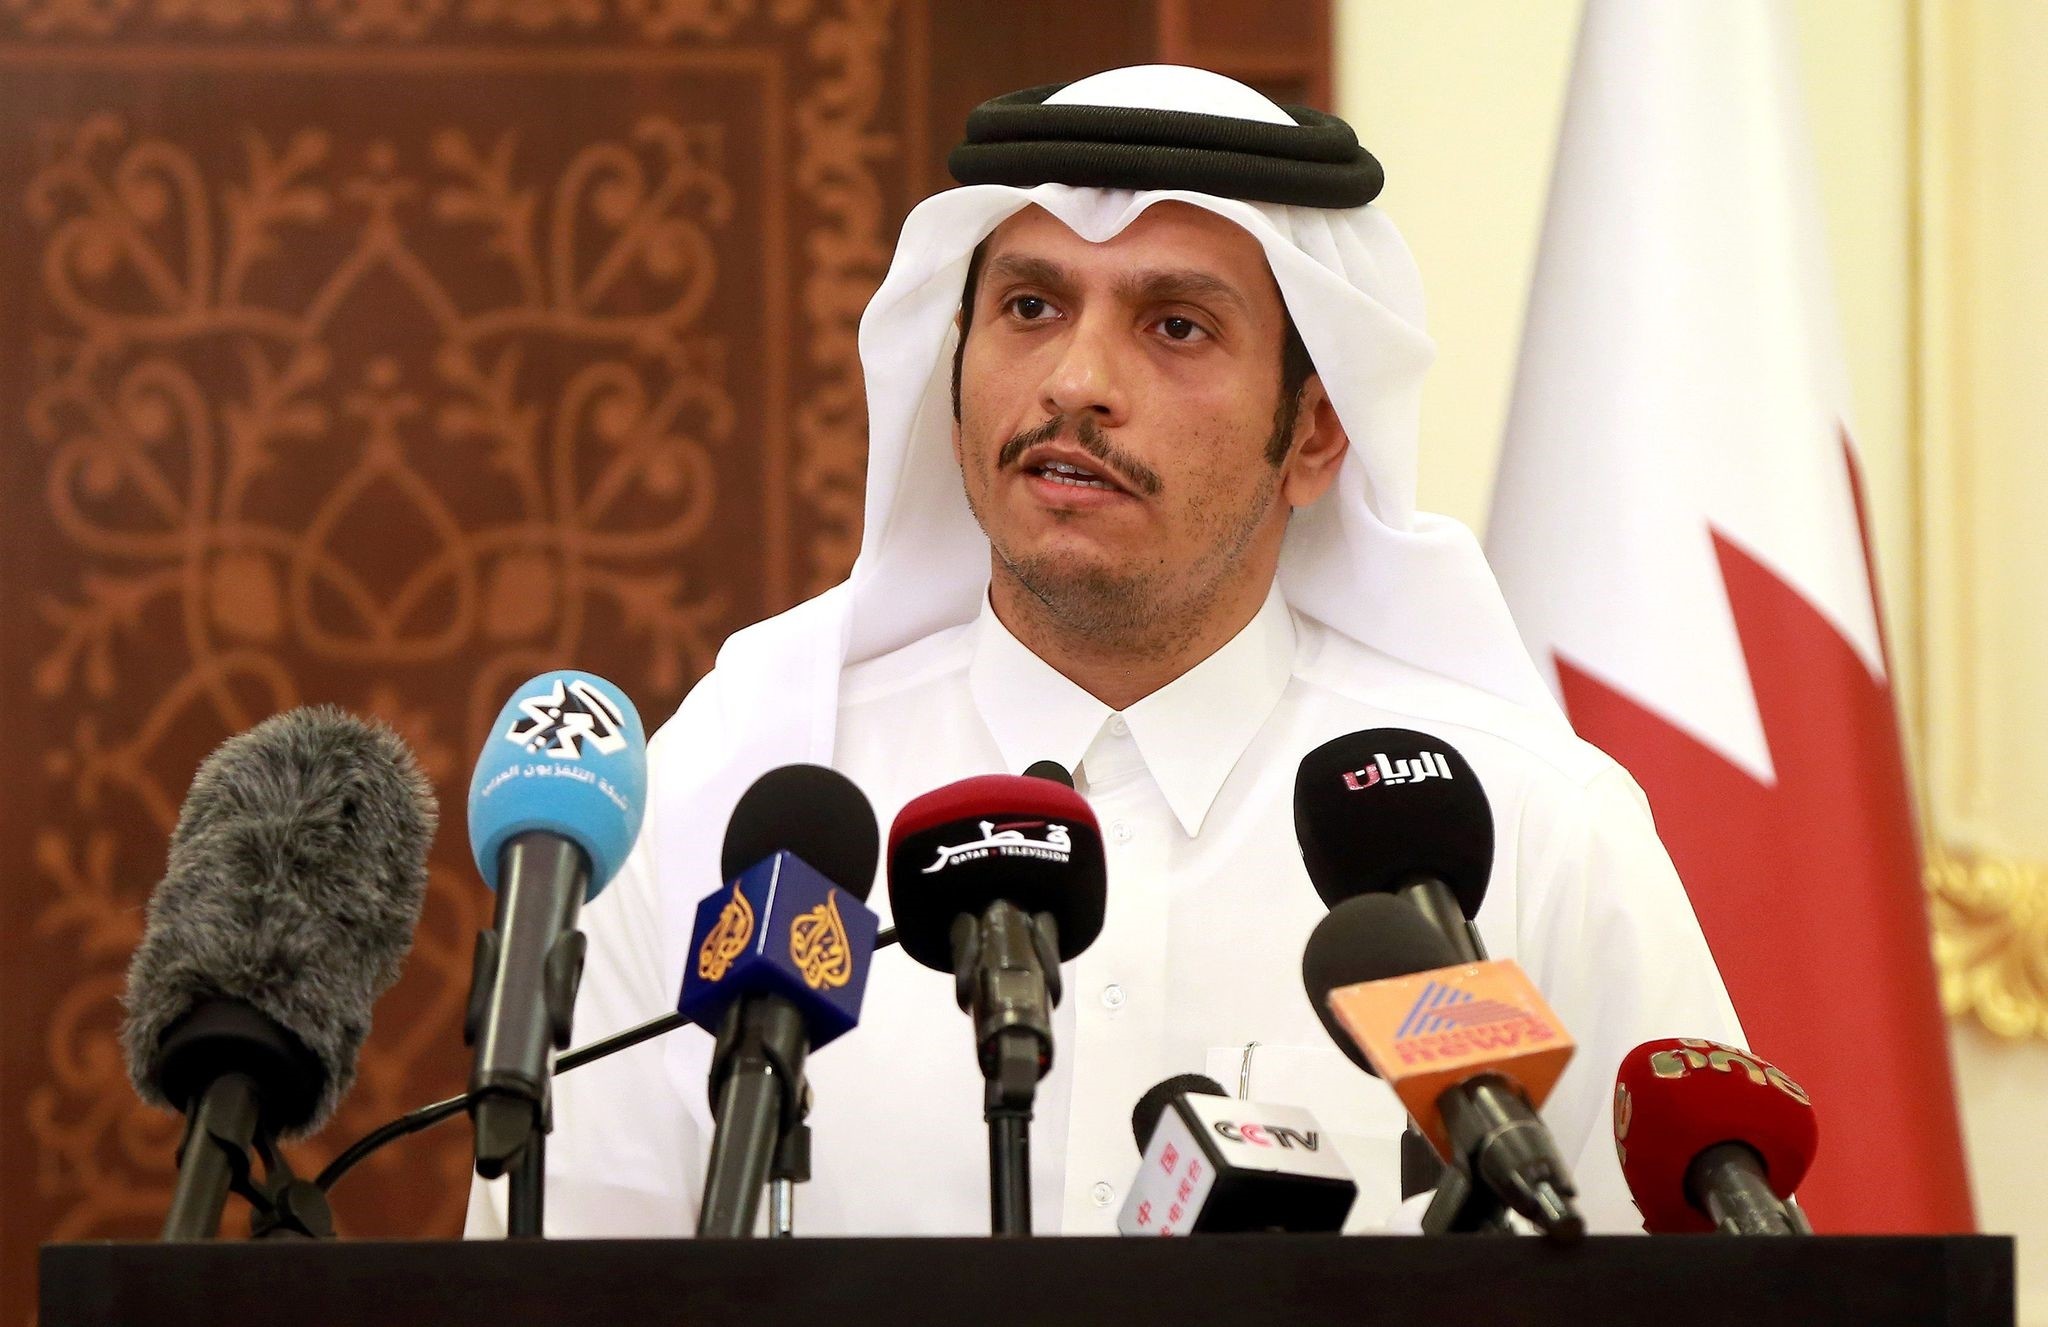 Qatari Foreign Minister Mohammed bin Abdulrahman al-Thani gives a press conference in Doha on May 25, 2017. (AFP Photo)